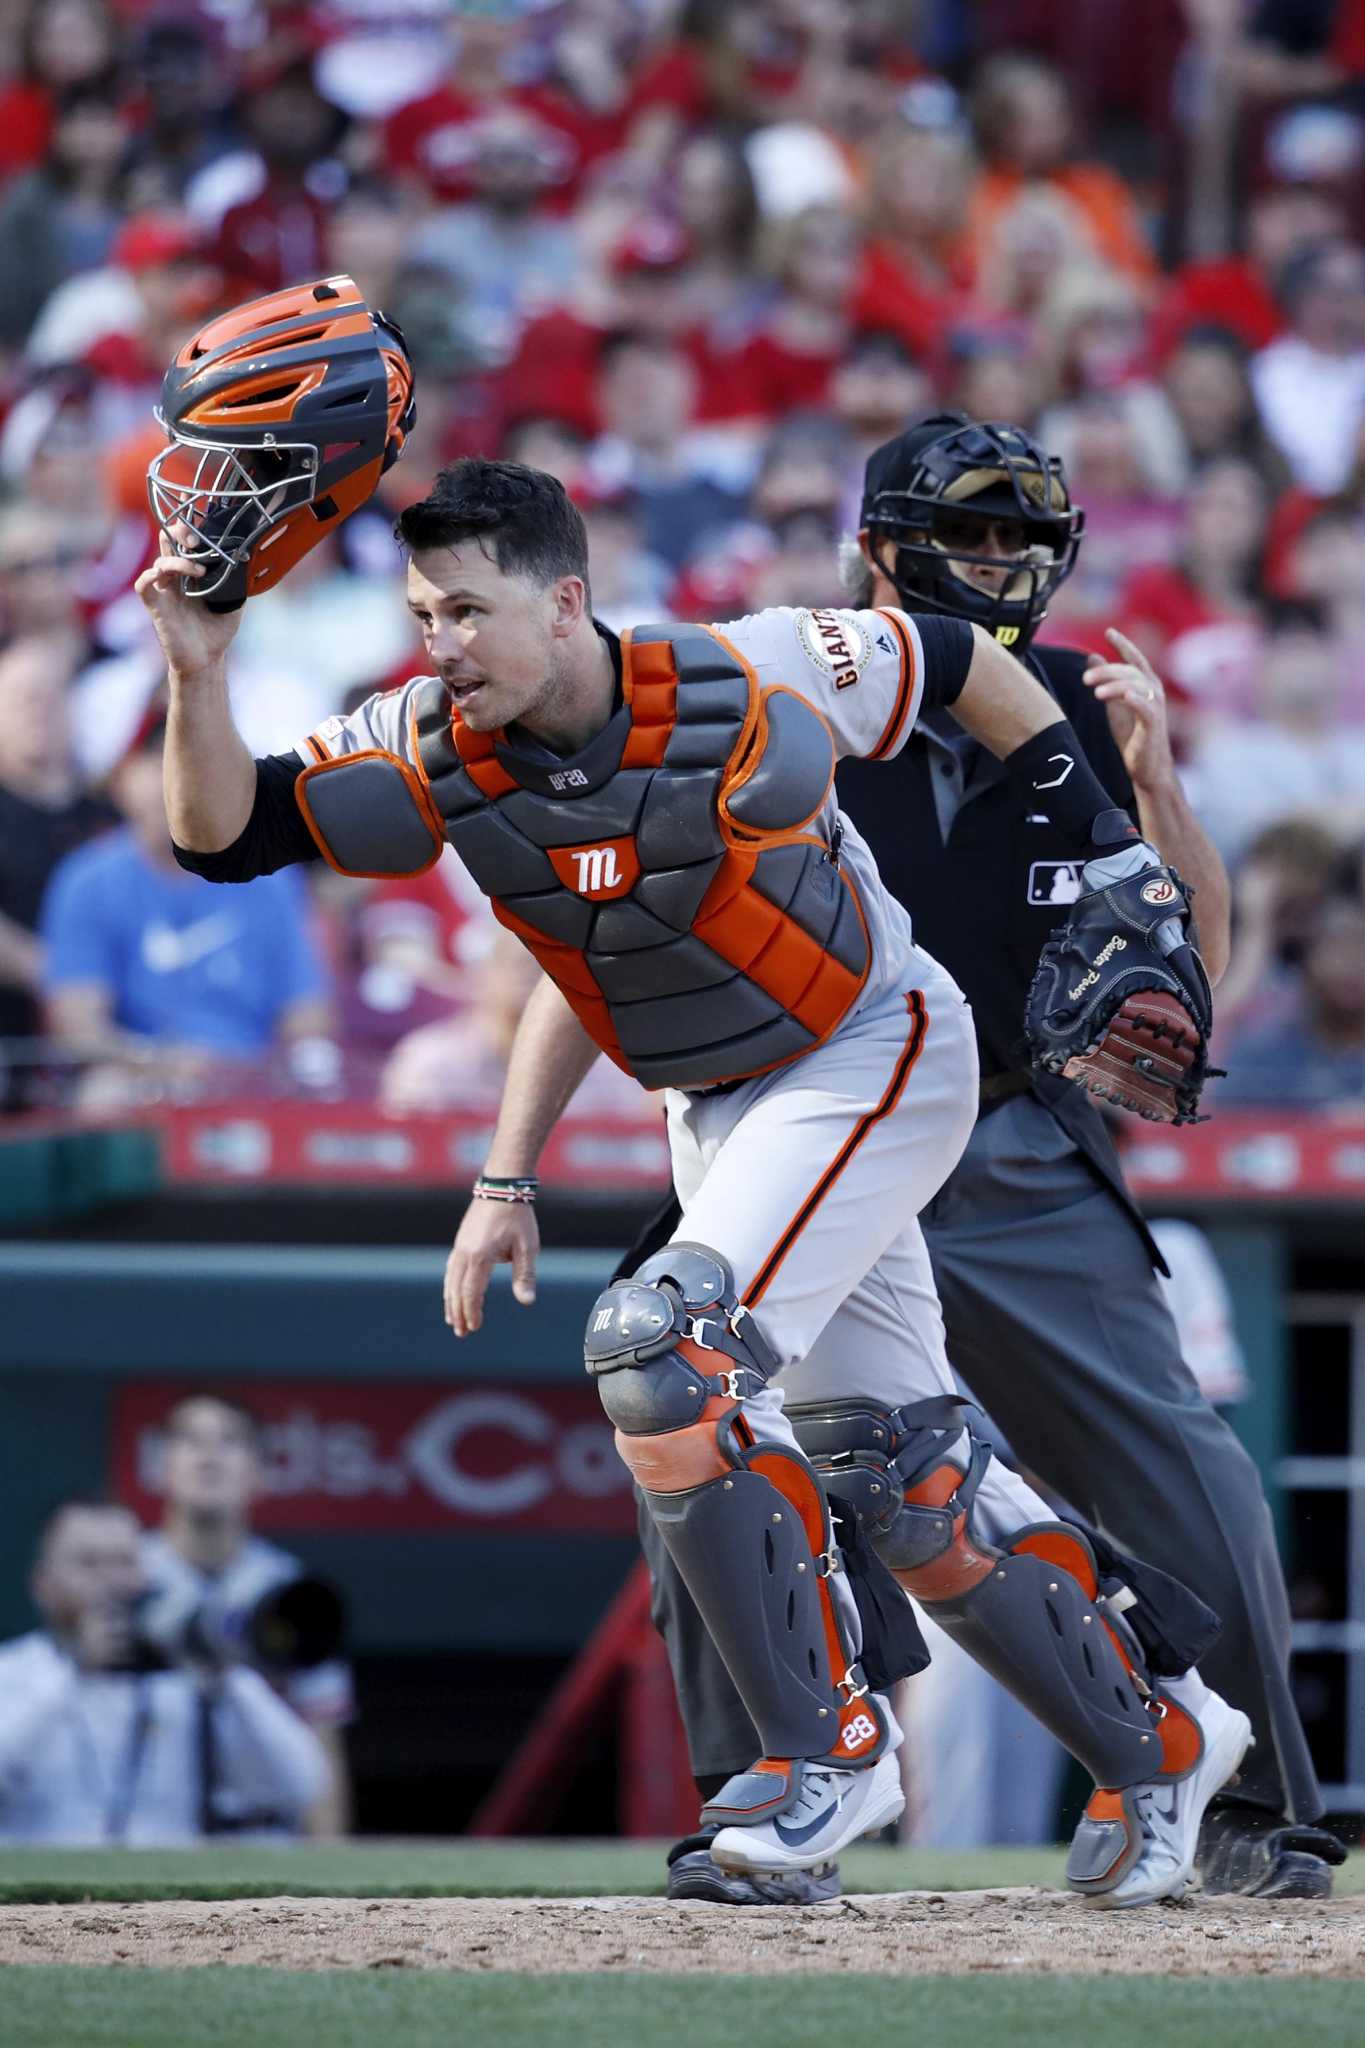 SF Giants pull out all the stops to honor Buster Posey